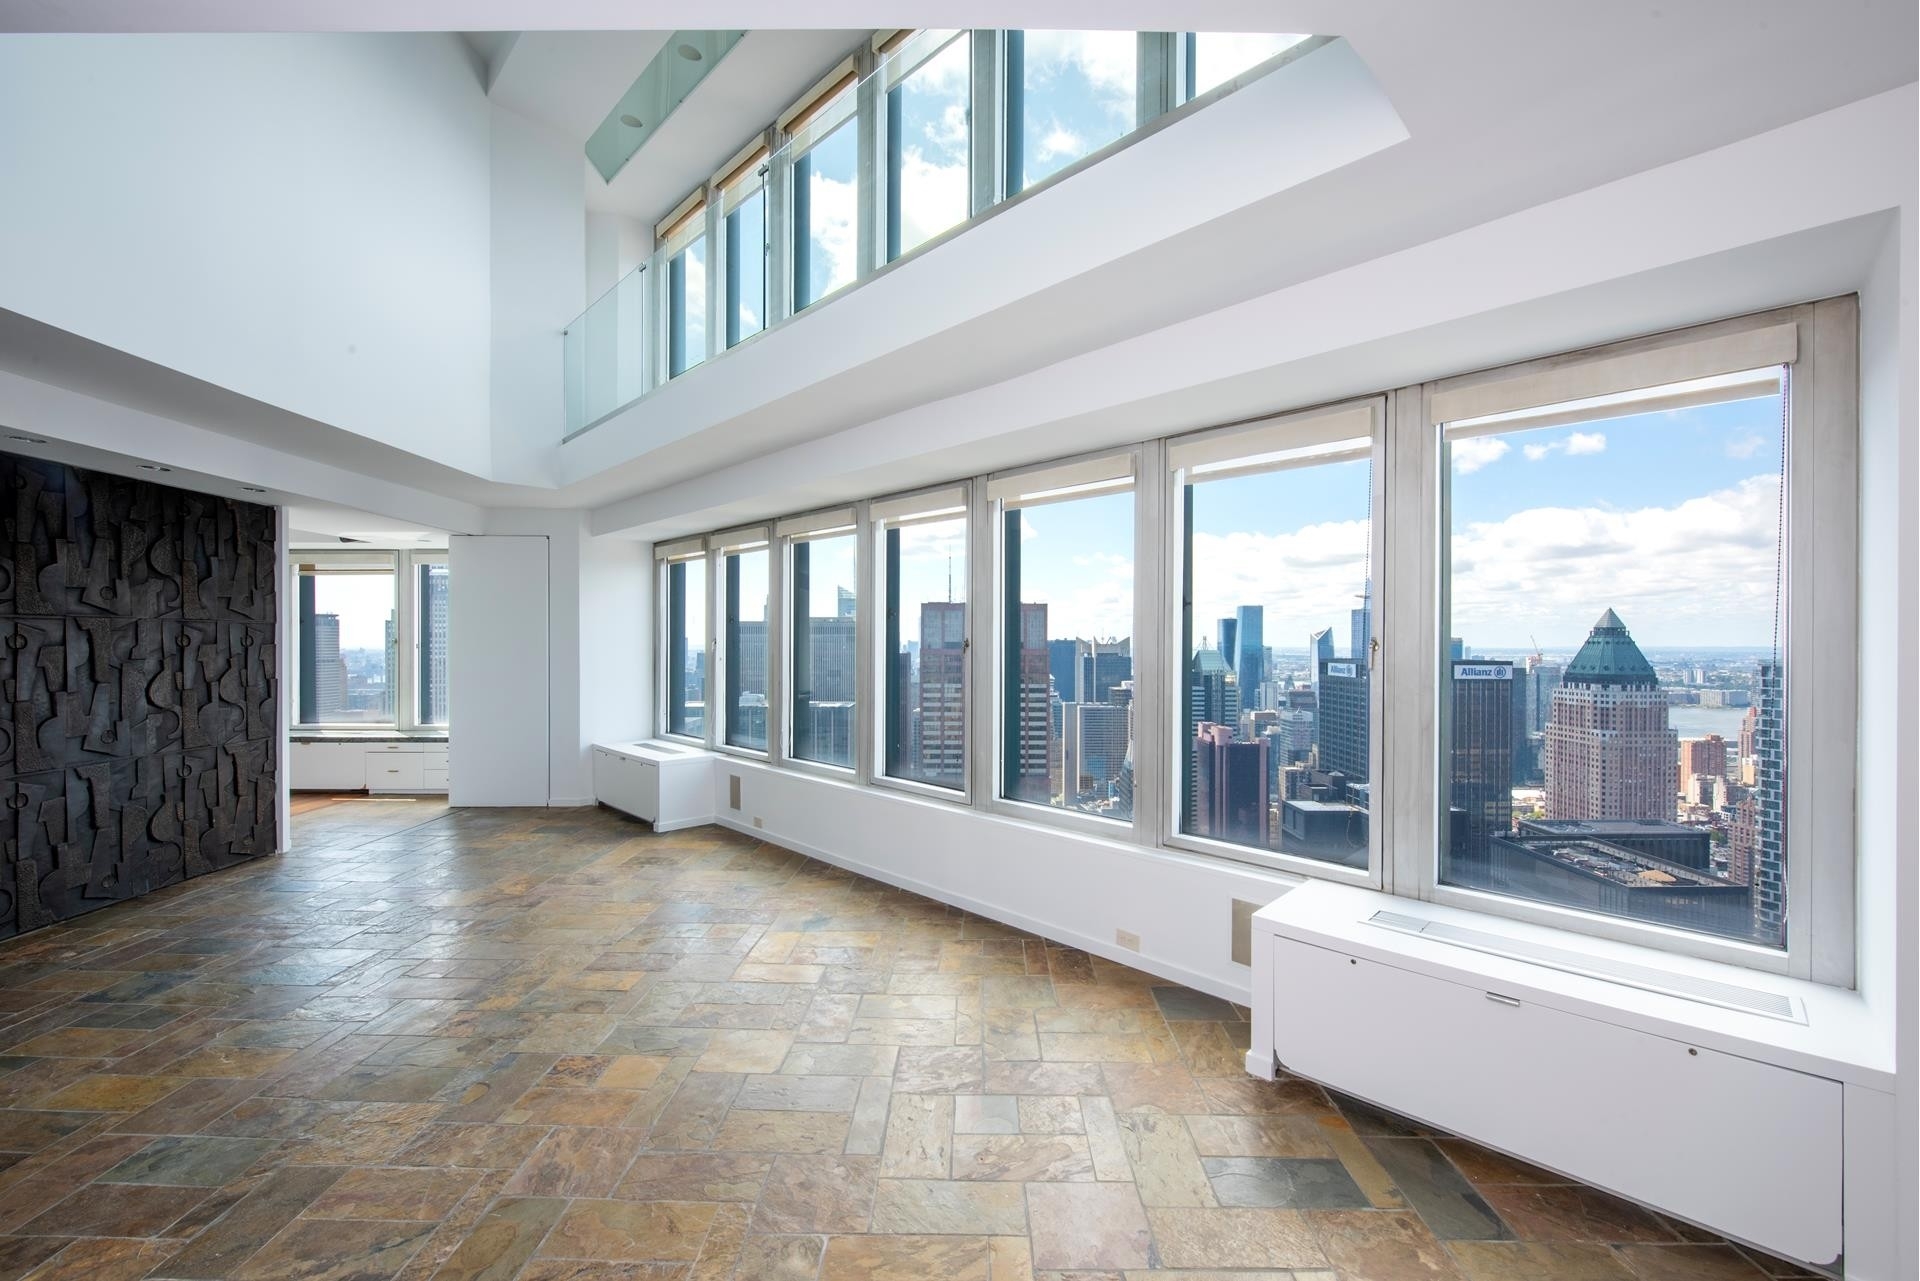 2. Condominiums for Sale at Cityspire, 150 W 56TH ST, 6703/6803 Midtown West, New York, New York 10019